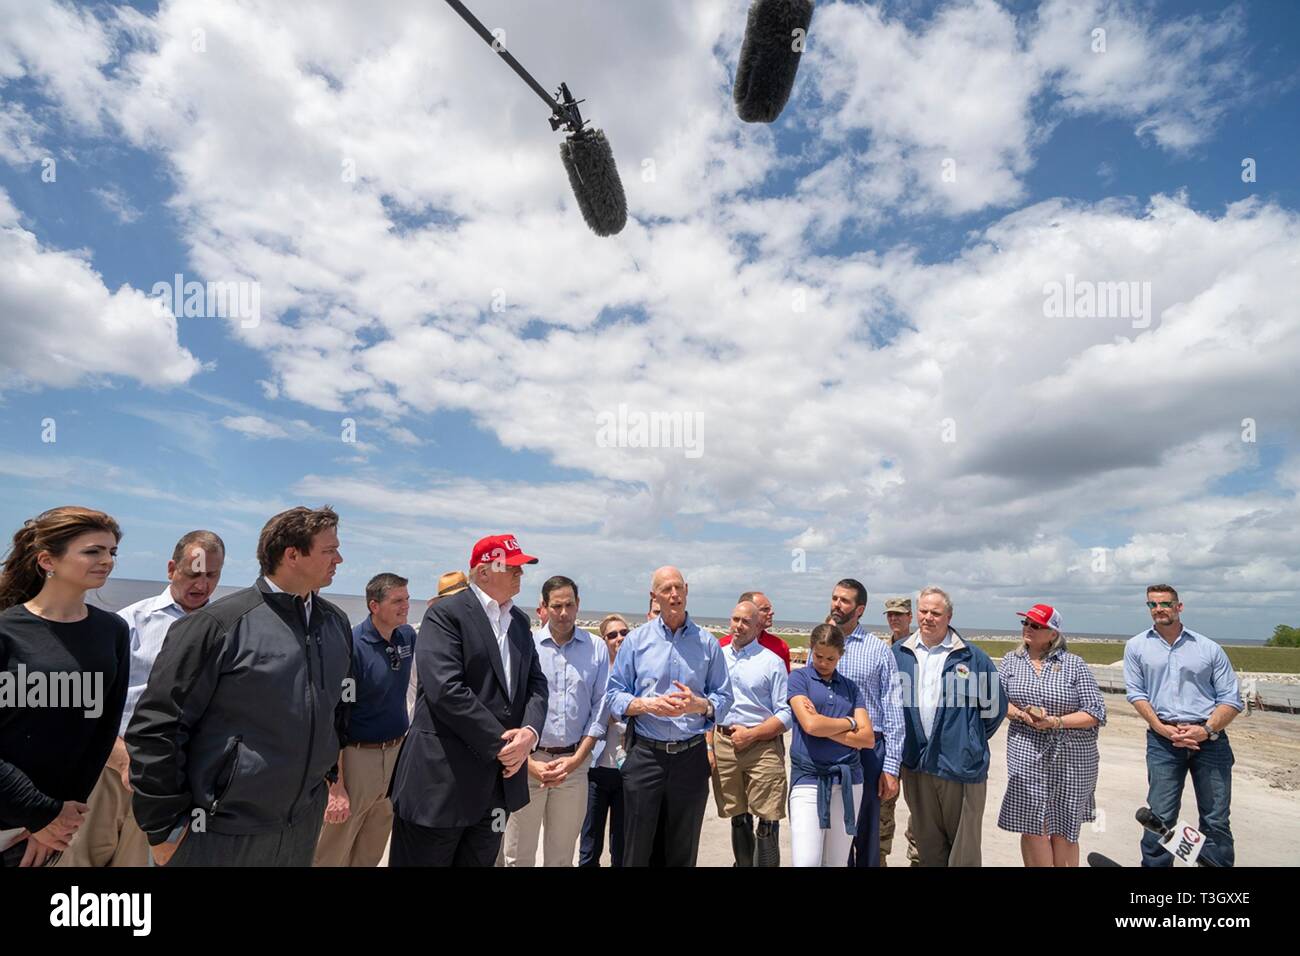 U.S Senator Rick Scott of Florida, center, answers a questions as President Donald Trump, right, looks on during a visit to Lake Okeechobee and the Herbert Hoover Dike March 29, 2019 in Canal Point, Florida. The Herbert Hoover Dike is a 143-mile earthen dam that surrounds Lake Okeechobee and currently under a massive renovation and repair project. Stock Photo